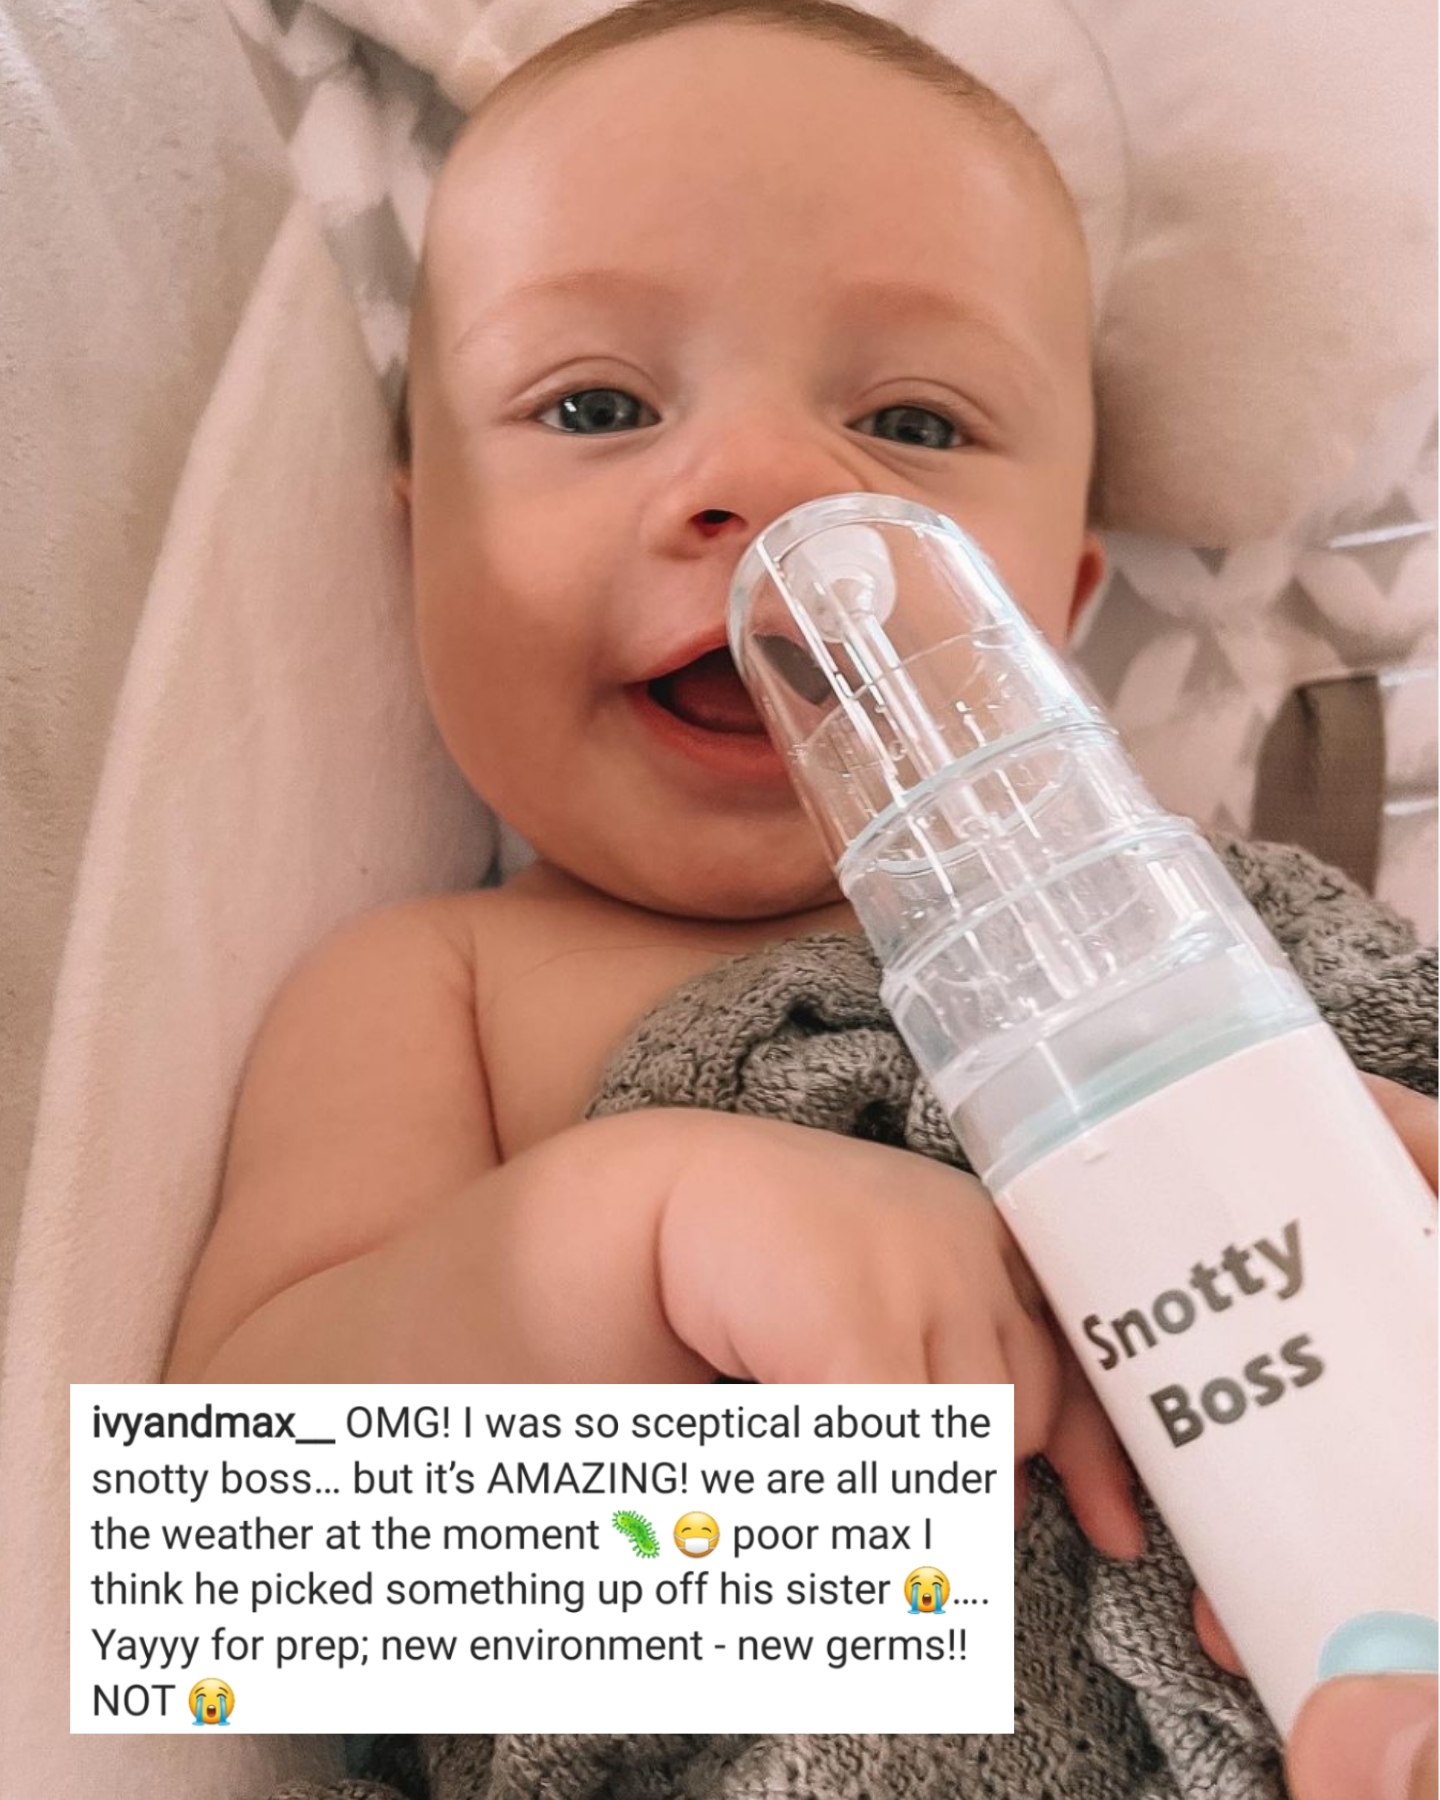 Snotty Boss Motorised Nasal Aspirator to help clear congestion in 10 seconds 